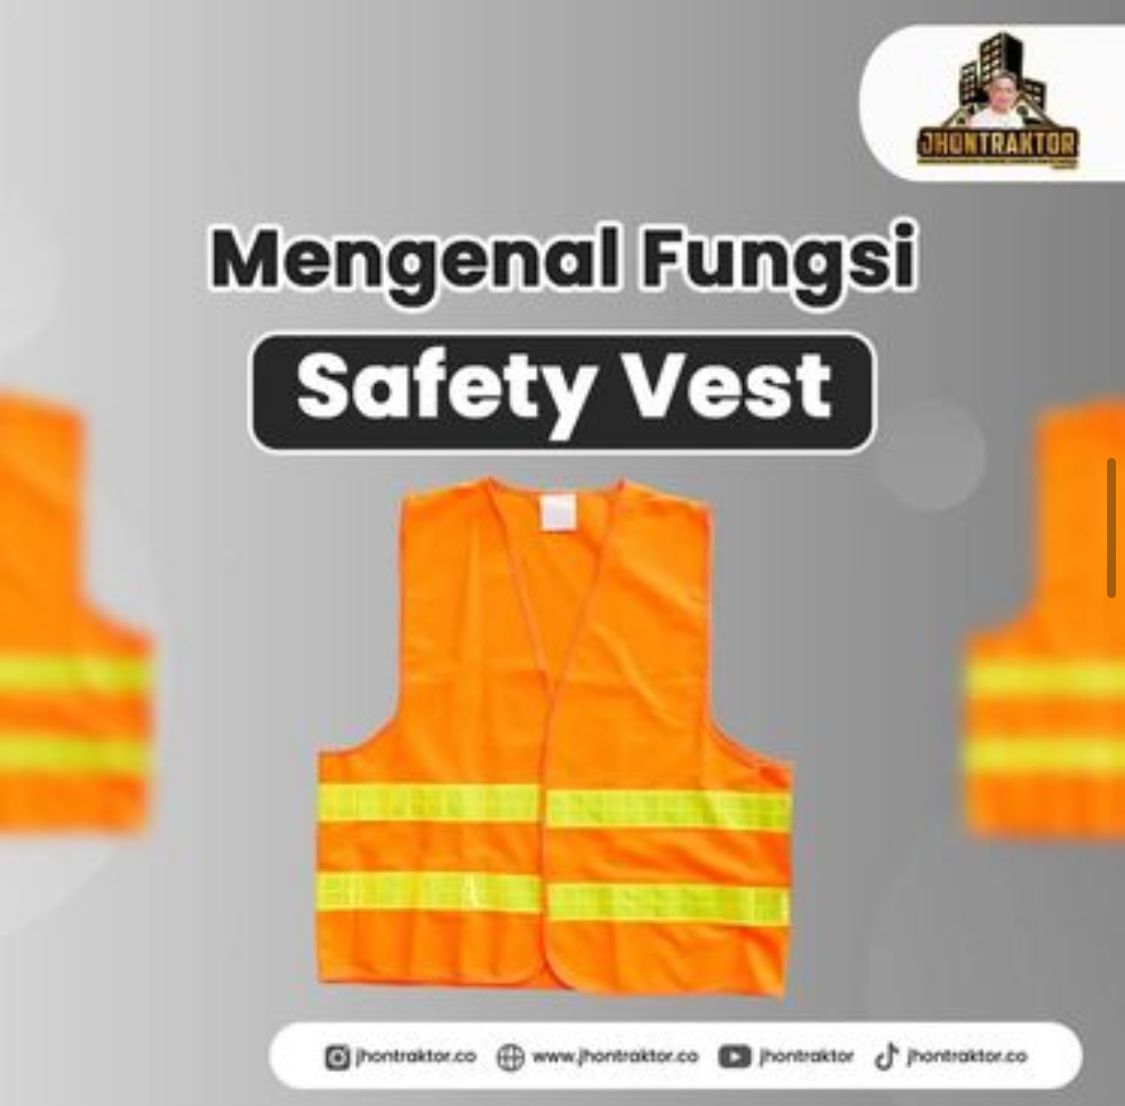 Mengenal Fungsi Safety Vest